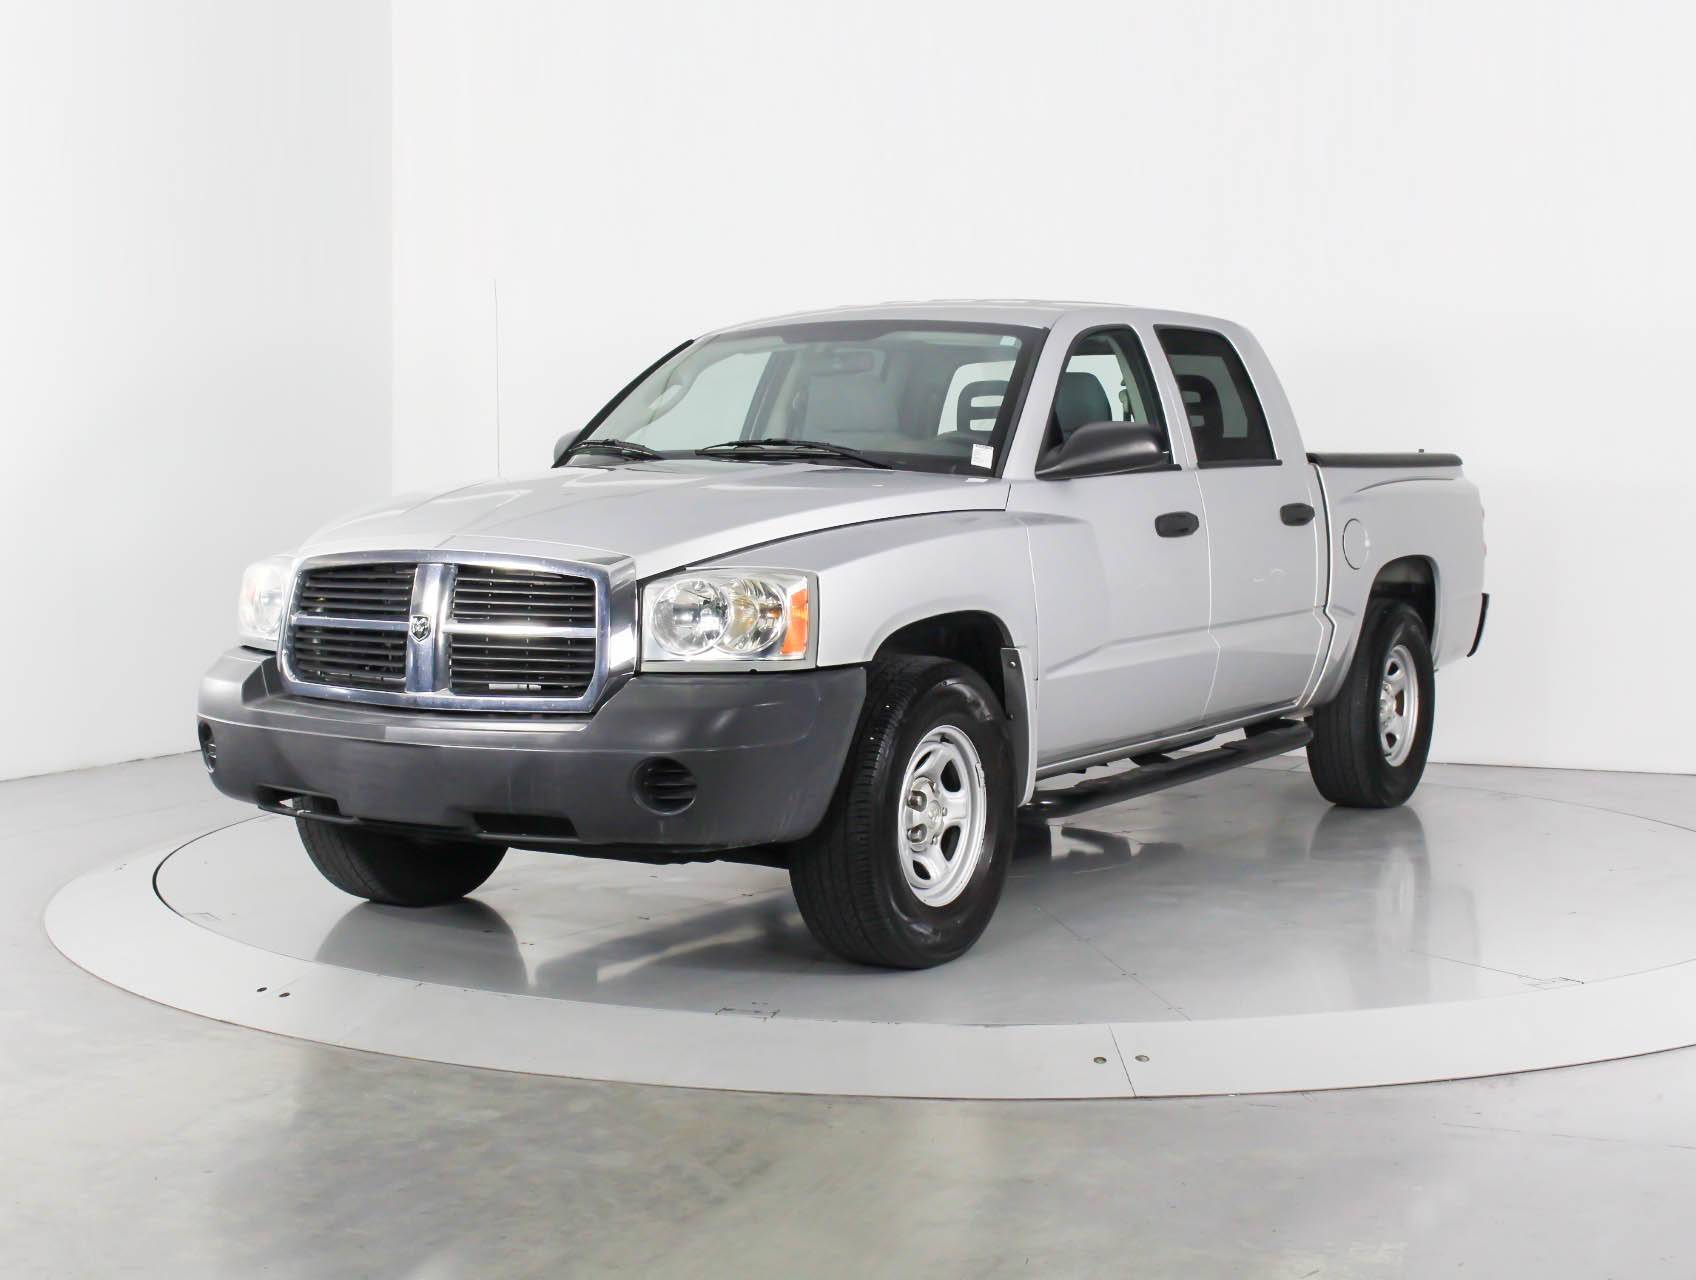 Used 2007 Dodge Dakota St For Sale In West Palm 104432